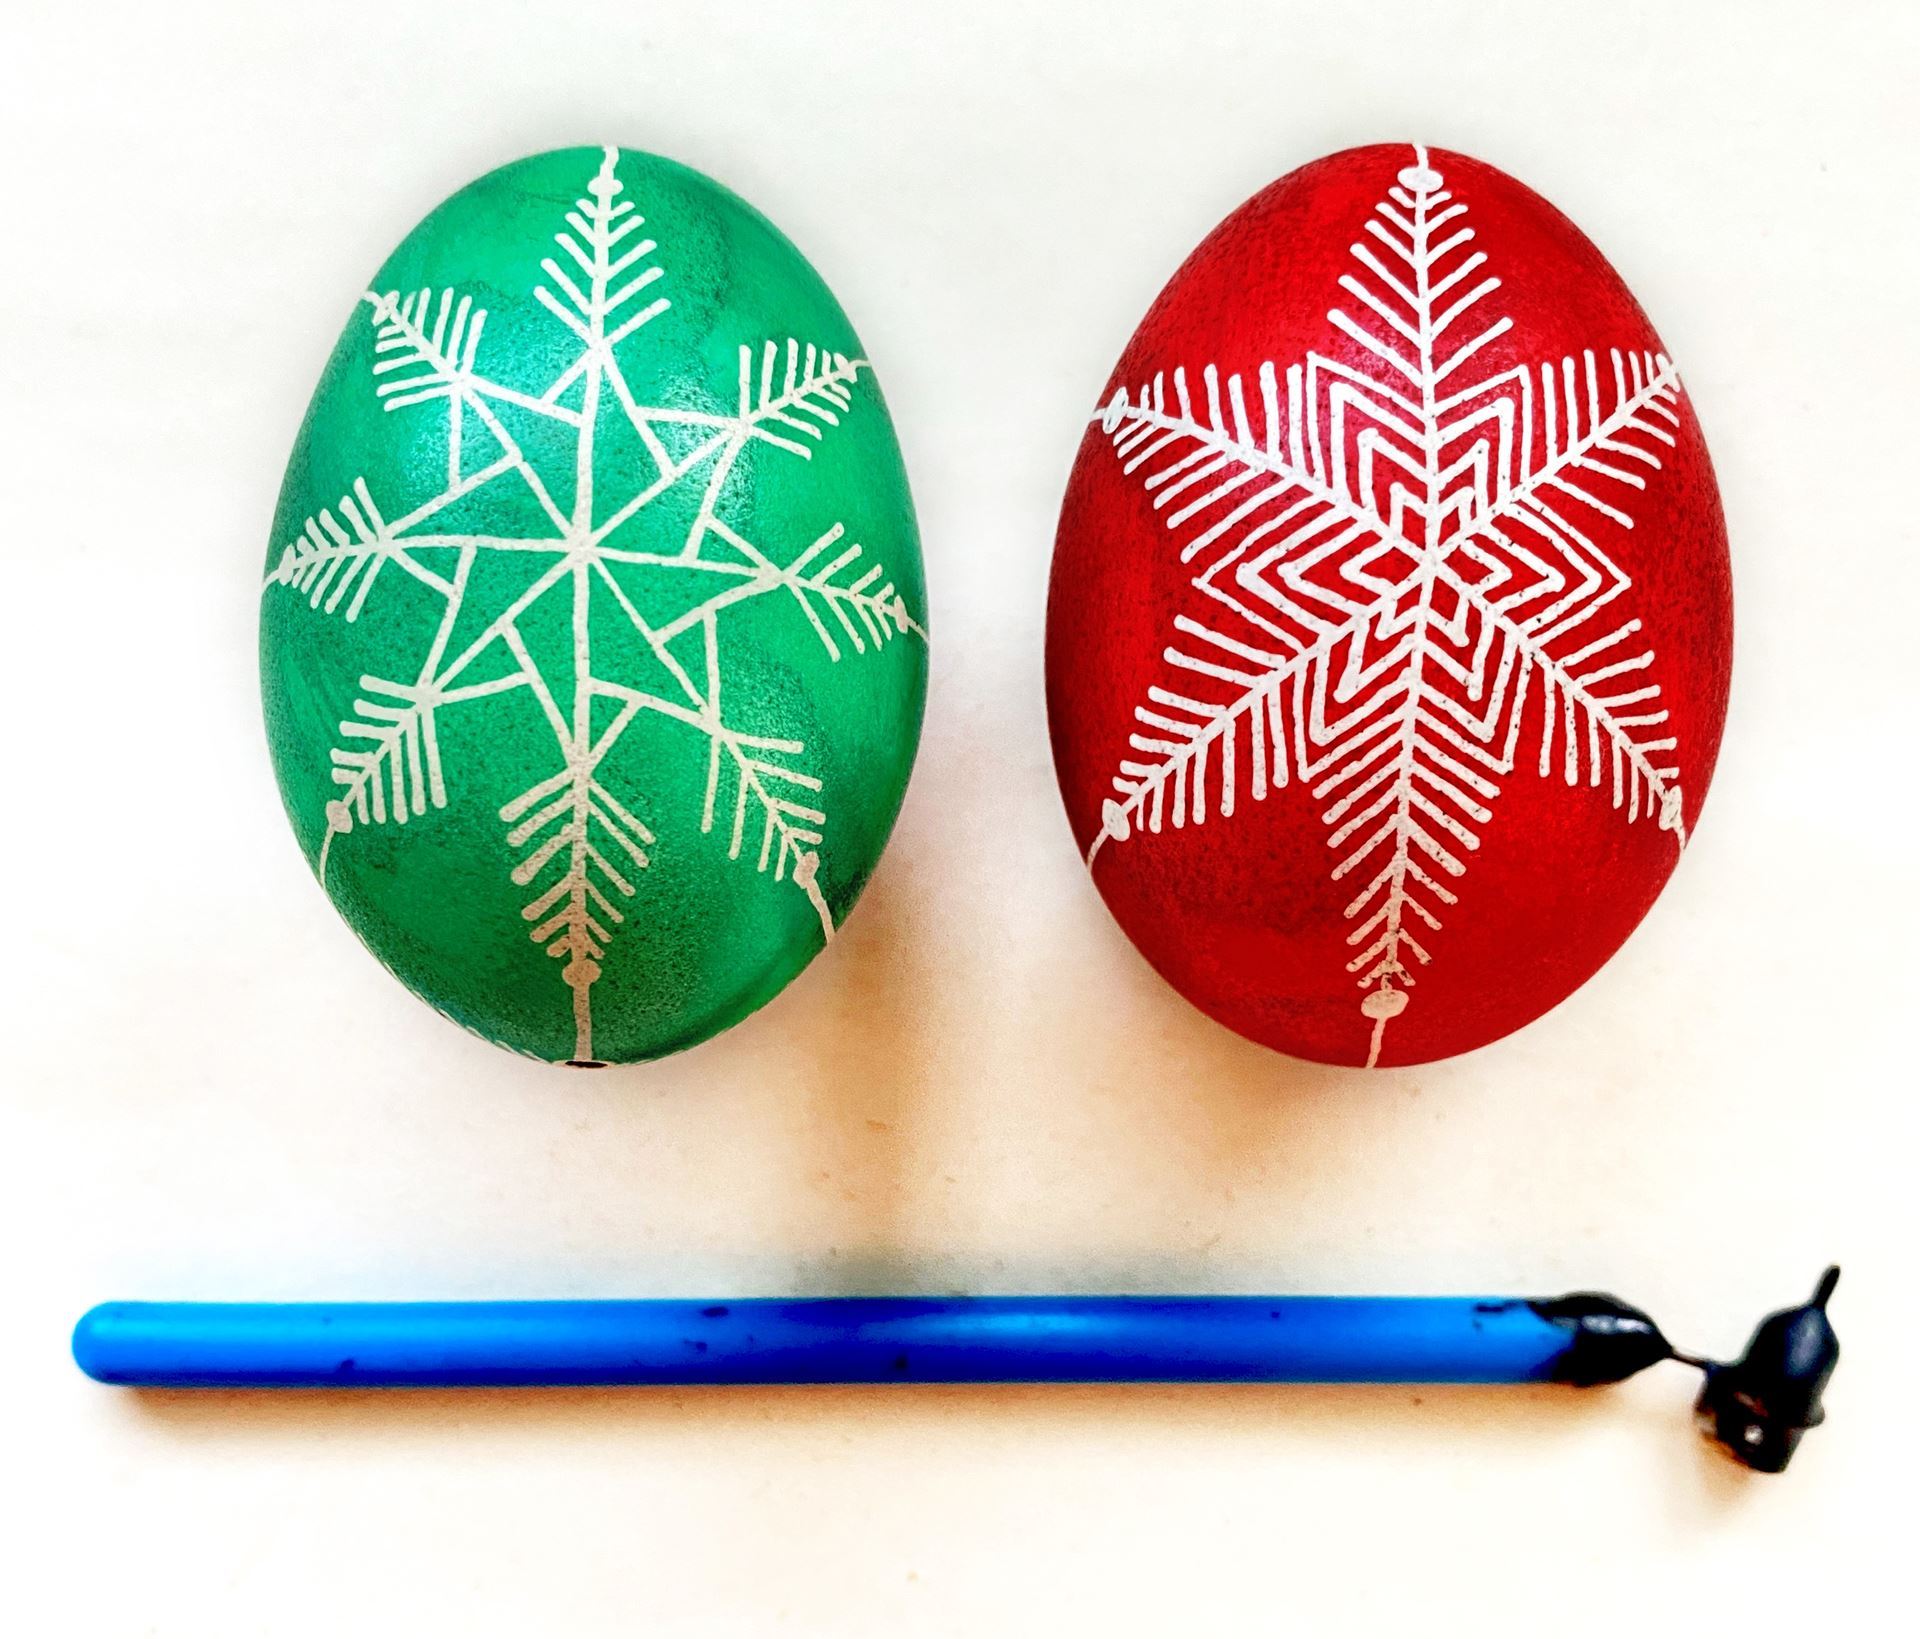 Using wax resist, the Pysanky is a unique egg-decorating technique reveals designs on colorful eggs. Pictured a "kistka" hot wax pen, and a green and red Pysanky decorated eggs.